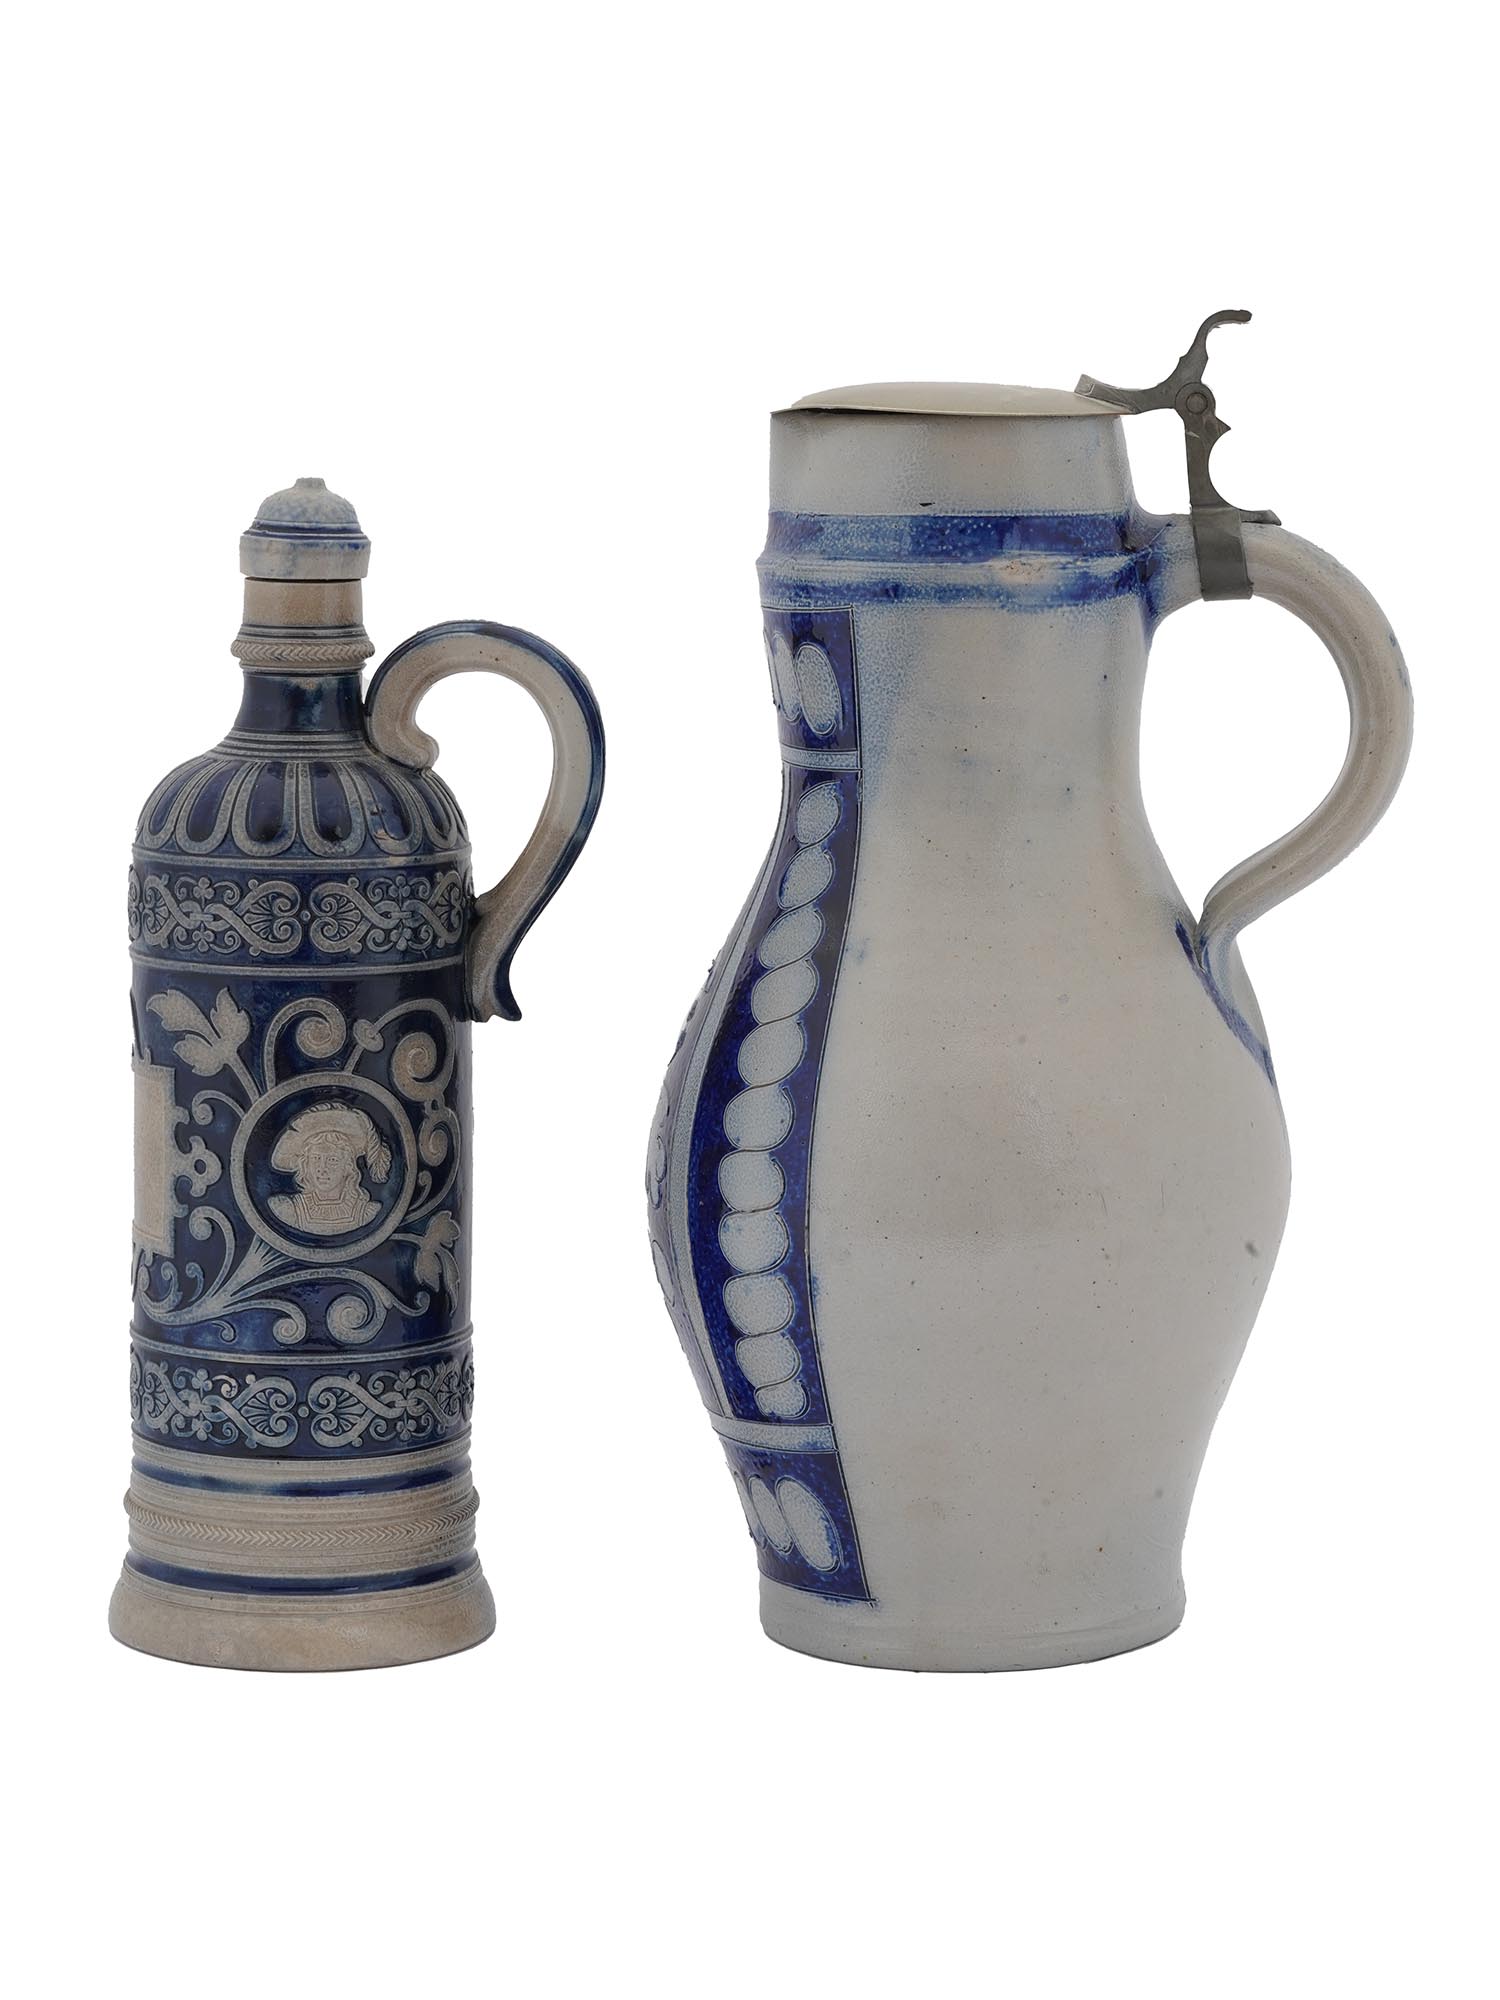 ANTIQUE FRENCH BLUE AND WHITE CERAMIC CIDER JUGS PIC-4